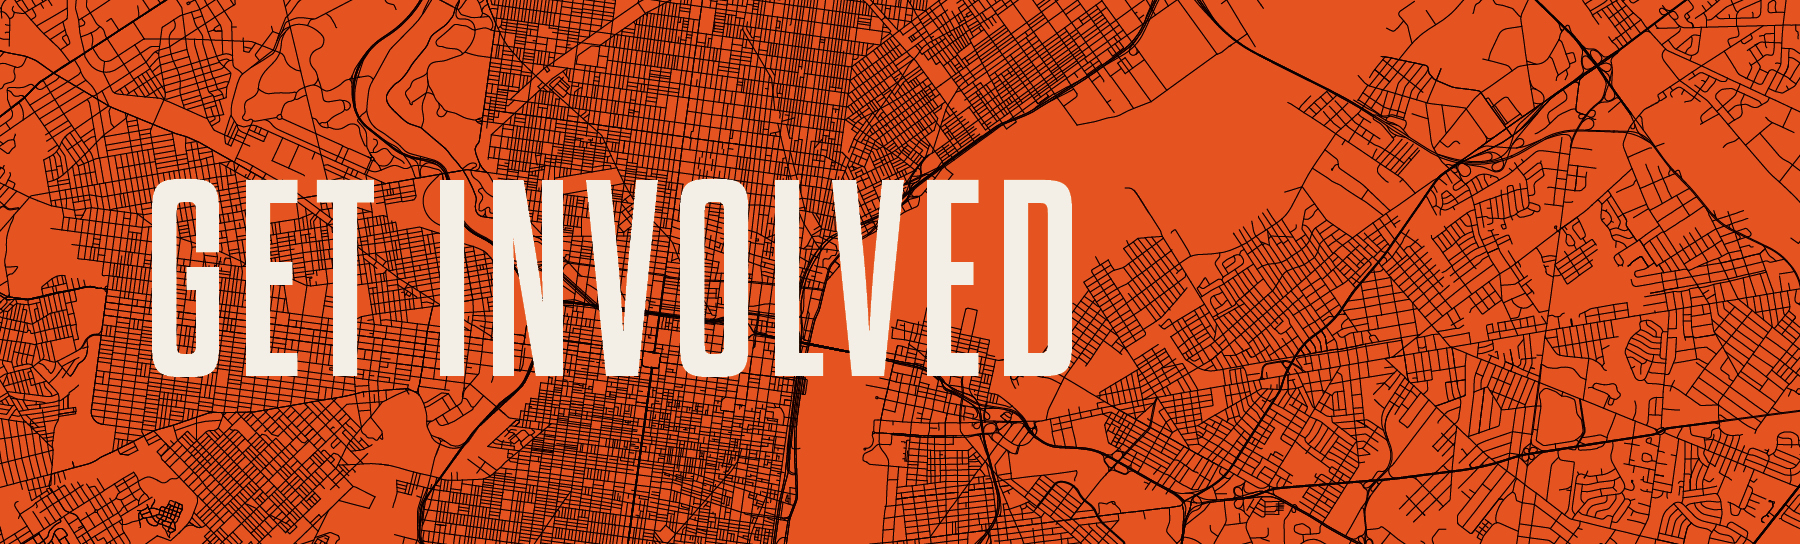 Abstract street map of Philadelphia, Text: Get Involved